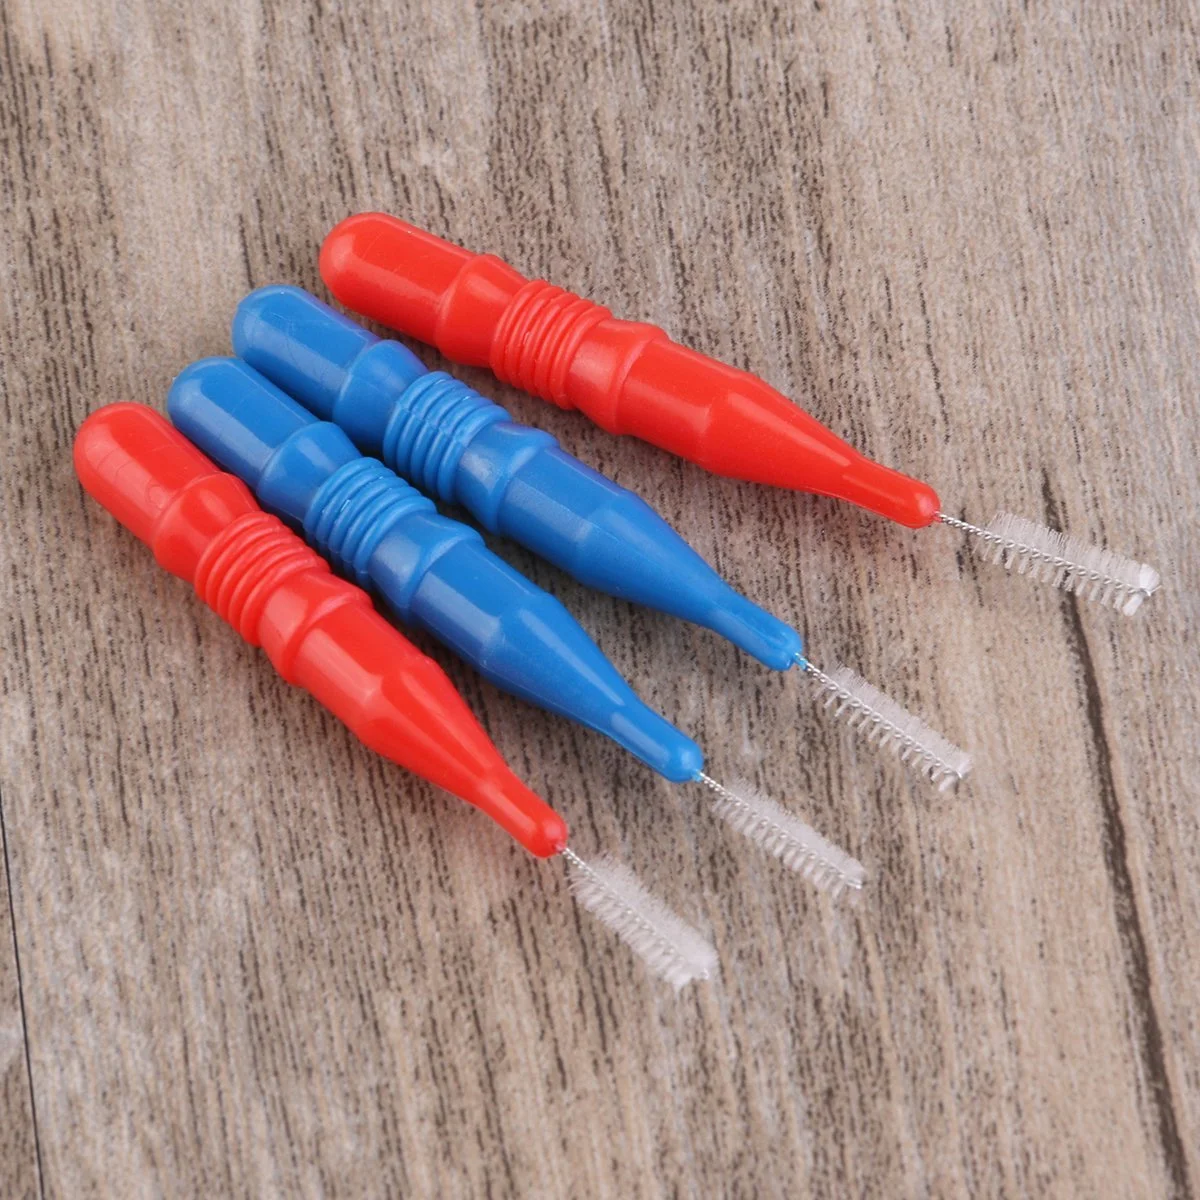 

30 Pcs Interdental Brush Cleaners Food Debris Floss Brush Dental Oral Care Tool (Red/Blue) Cure